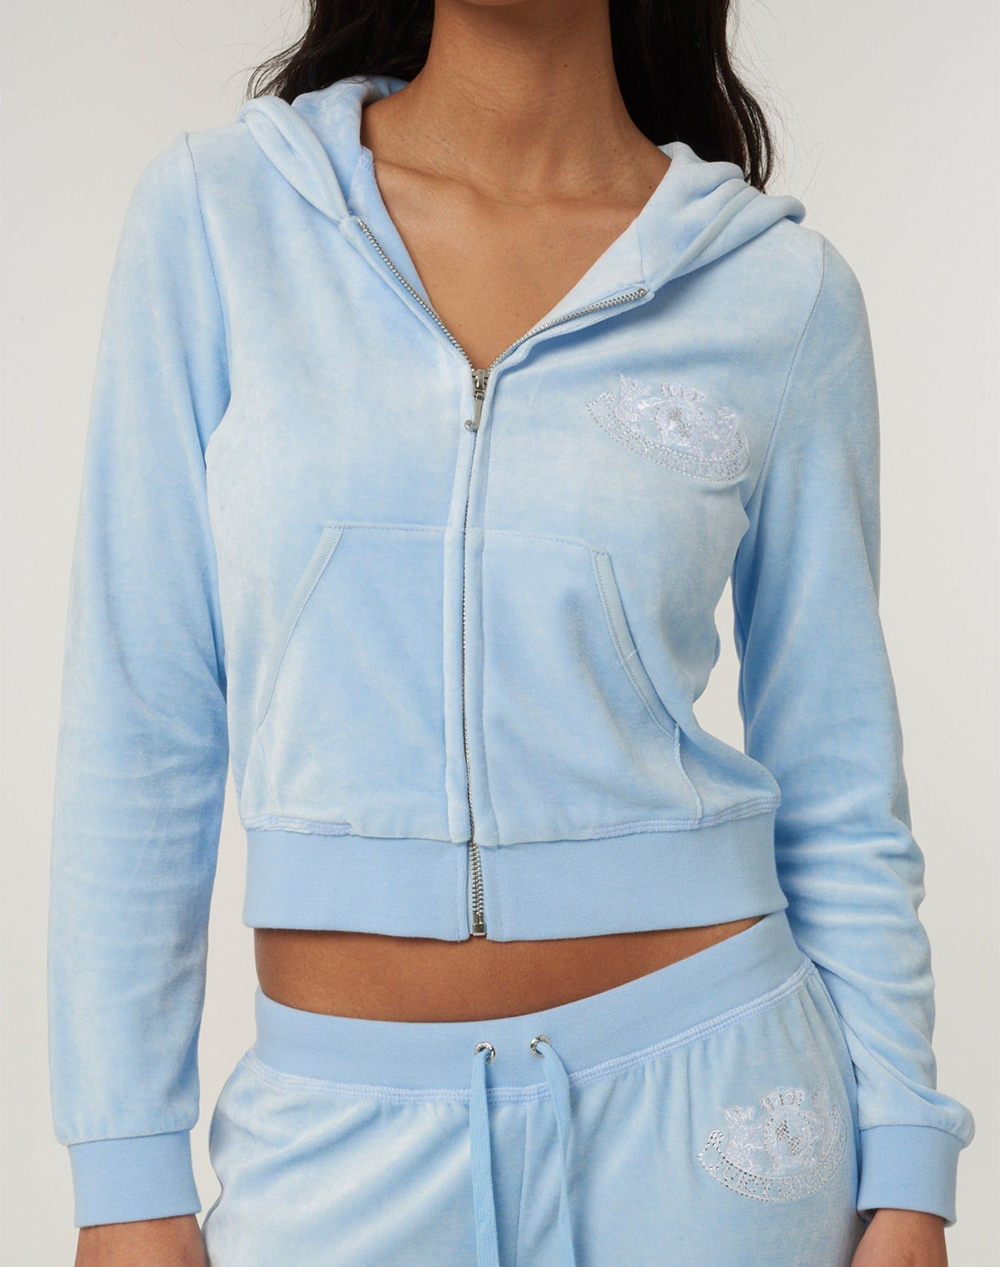 JUICY COUTURE HERITAGE DOG CREST ROBYN HOODIE JCBAS223813-134 LightBlue